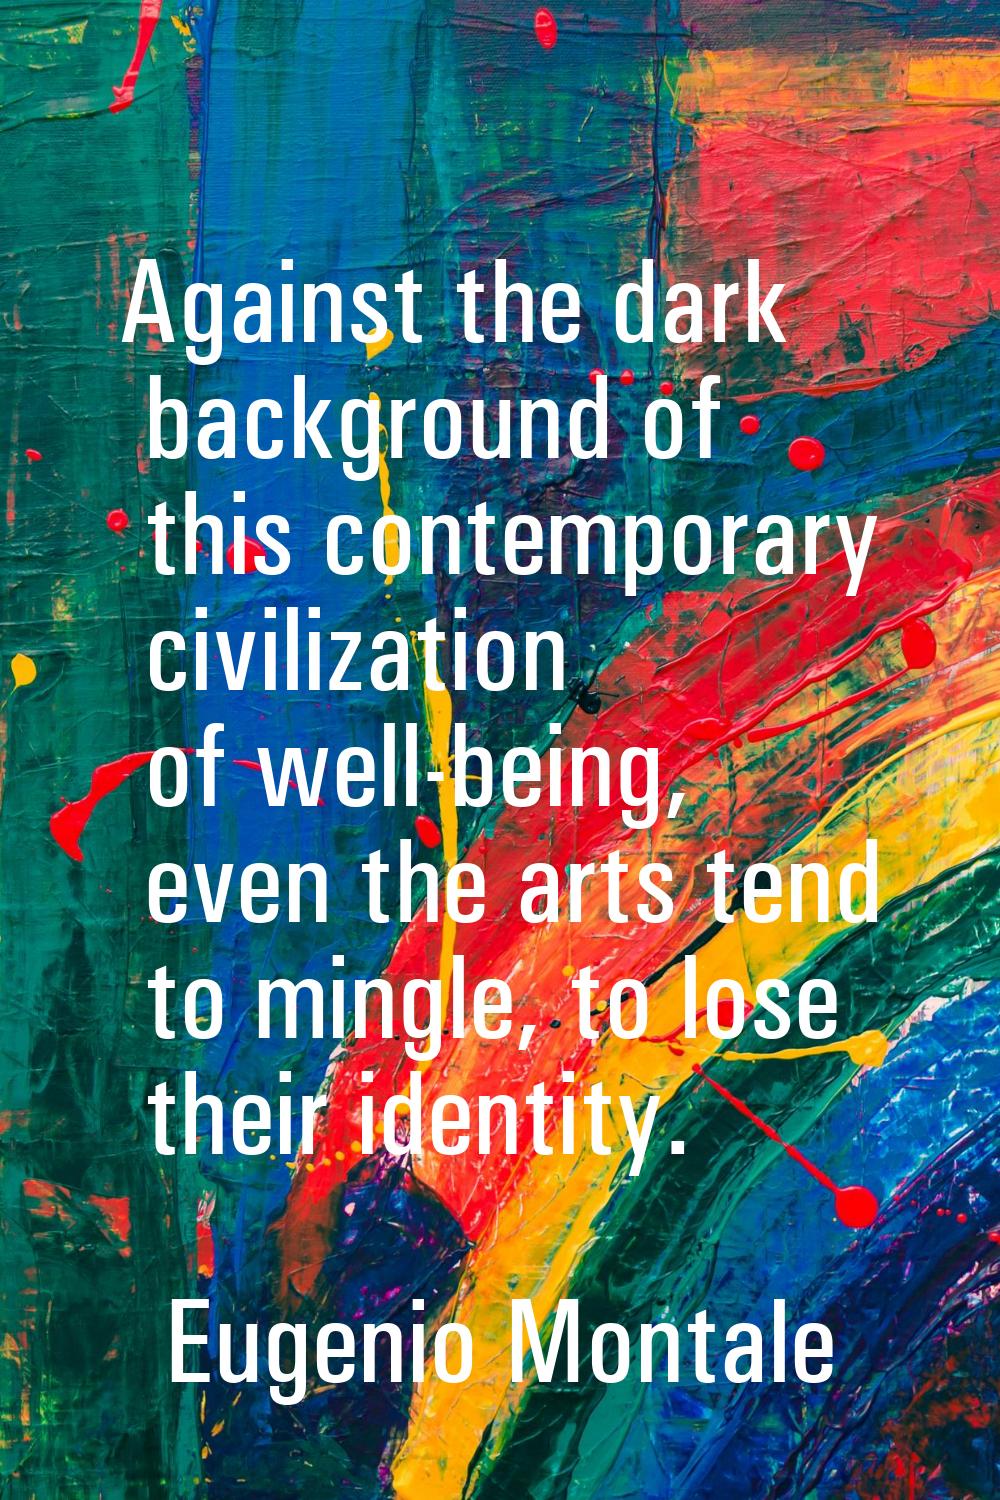 Against the dark background of this contemporary civilization of well-being, even the arts tend to 